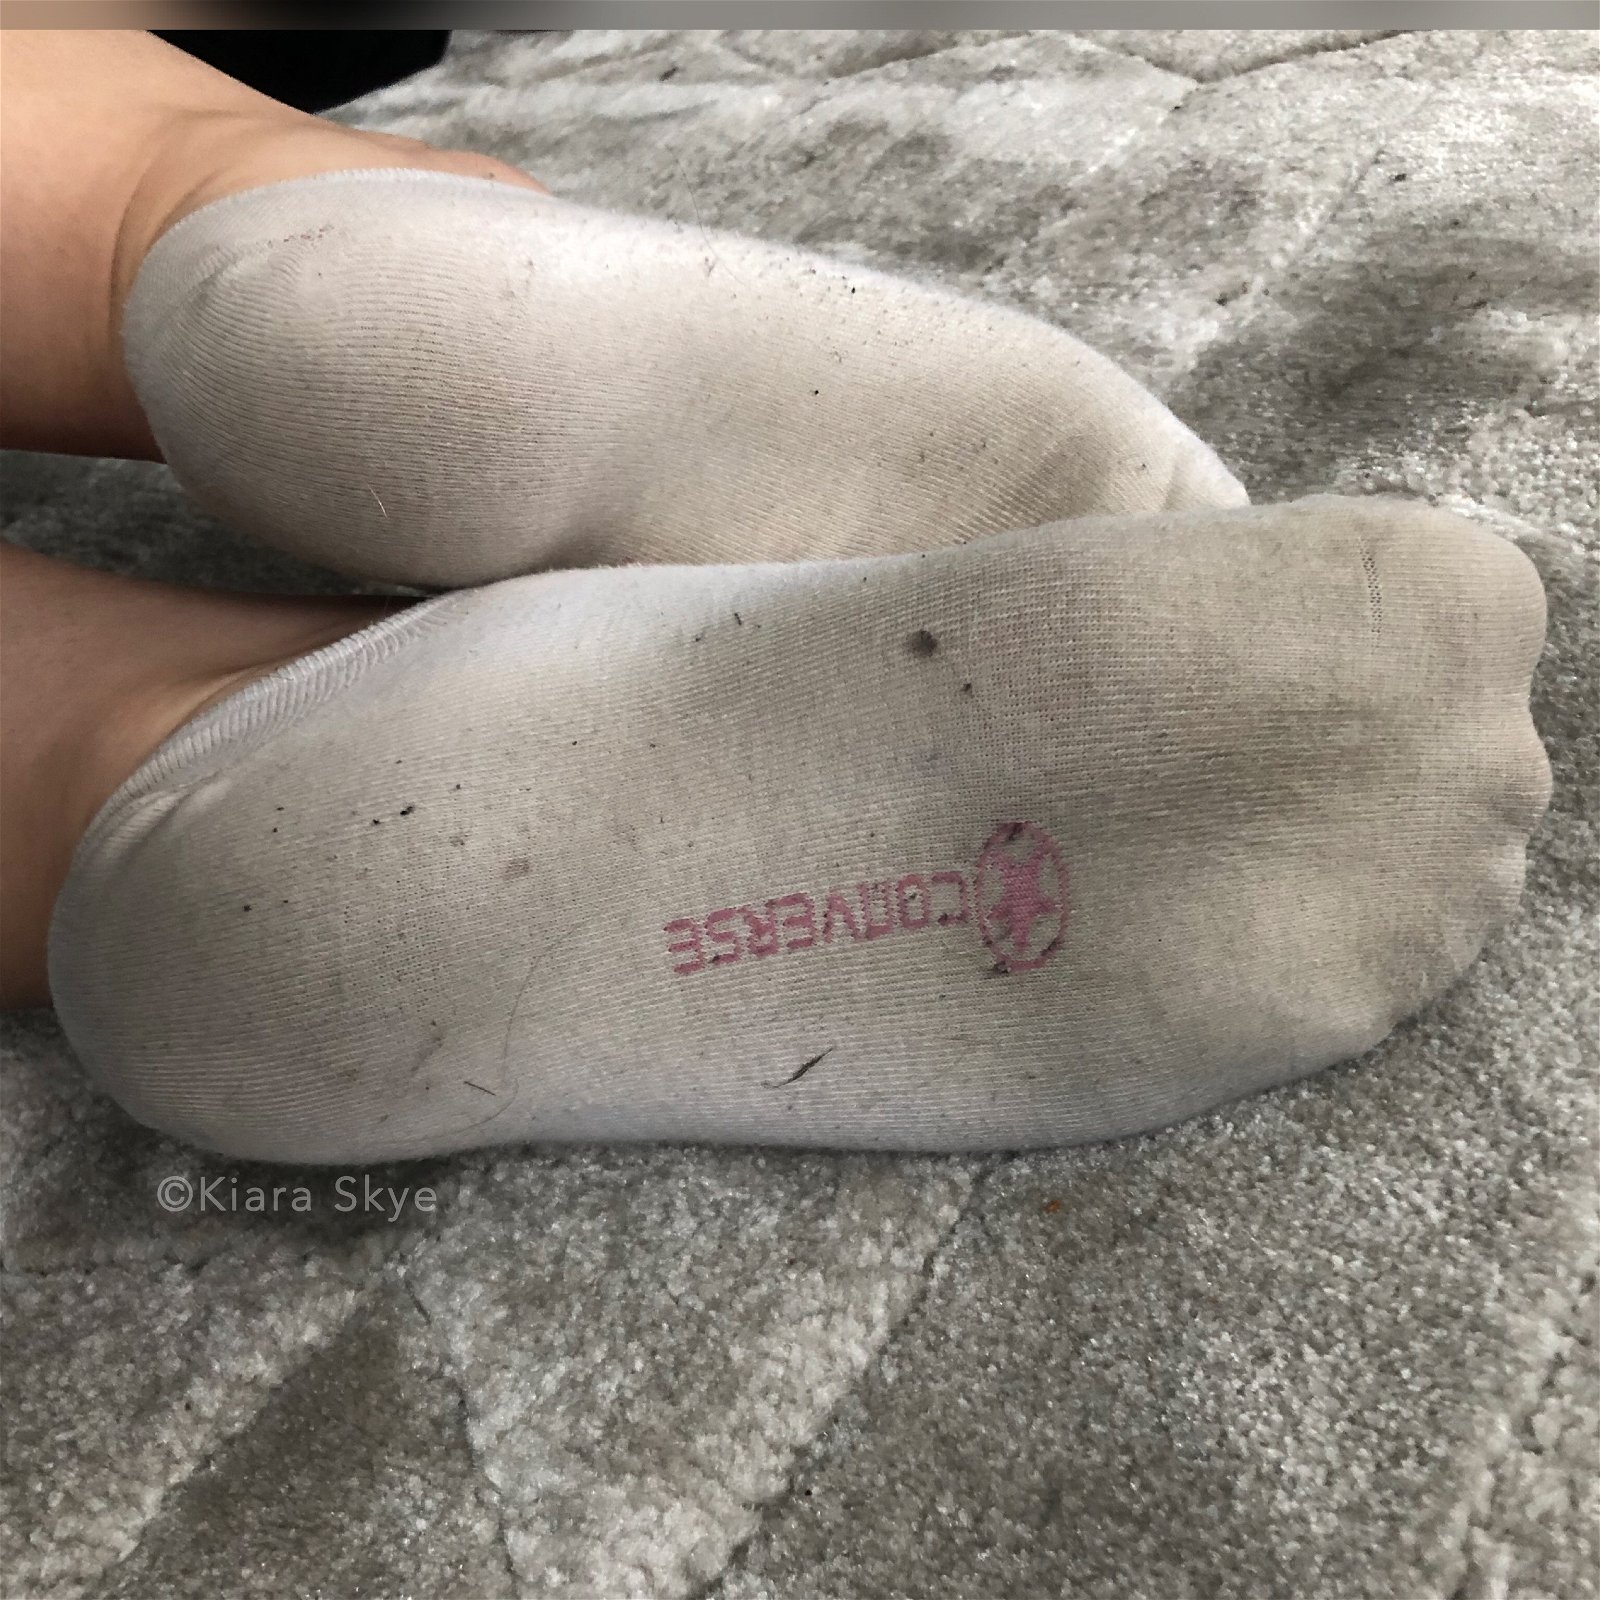 Explore the Post by Daichi with the username @Daichi, posted on April 23, 2019. The post is about the topic Foot Worship. and the text says 'nice nice i like'